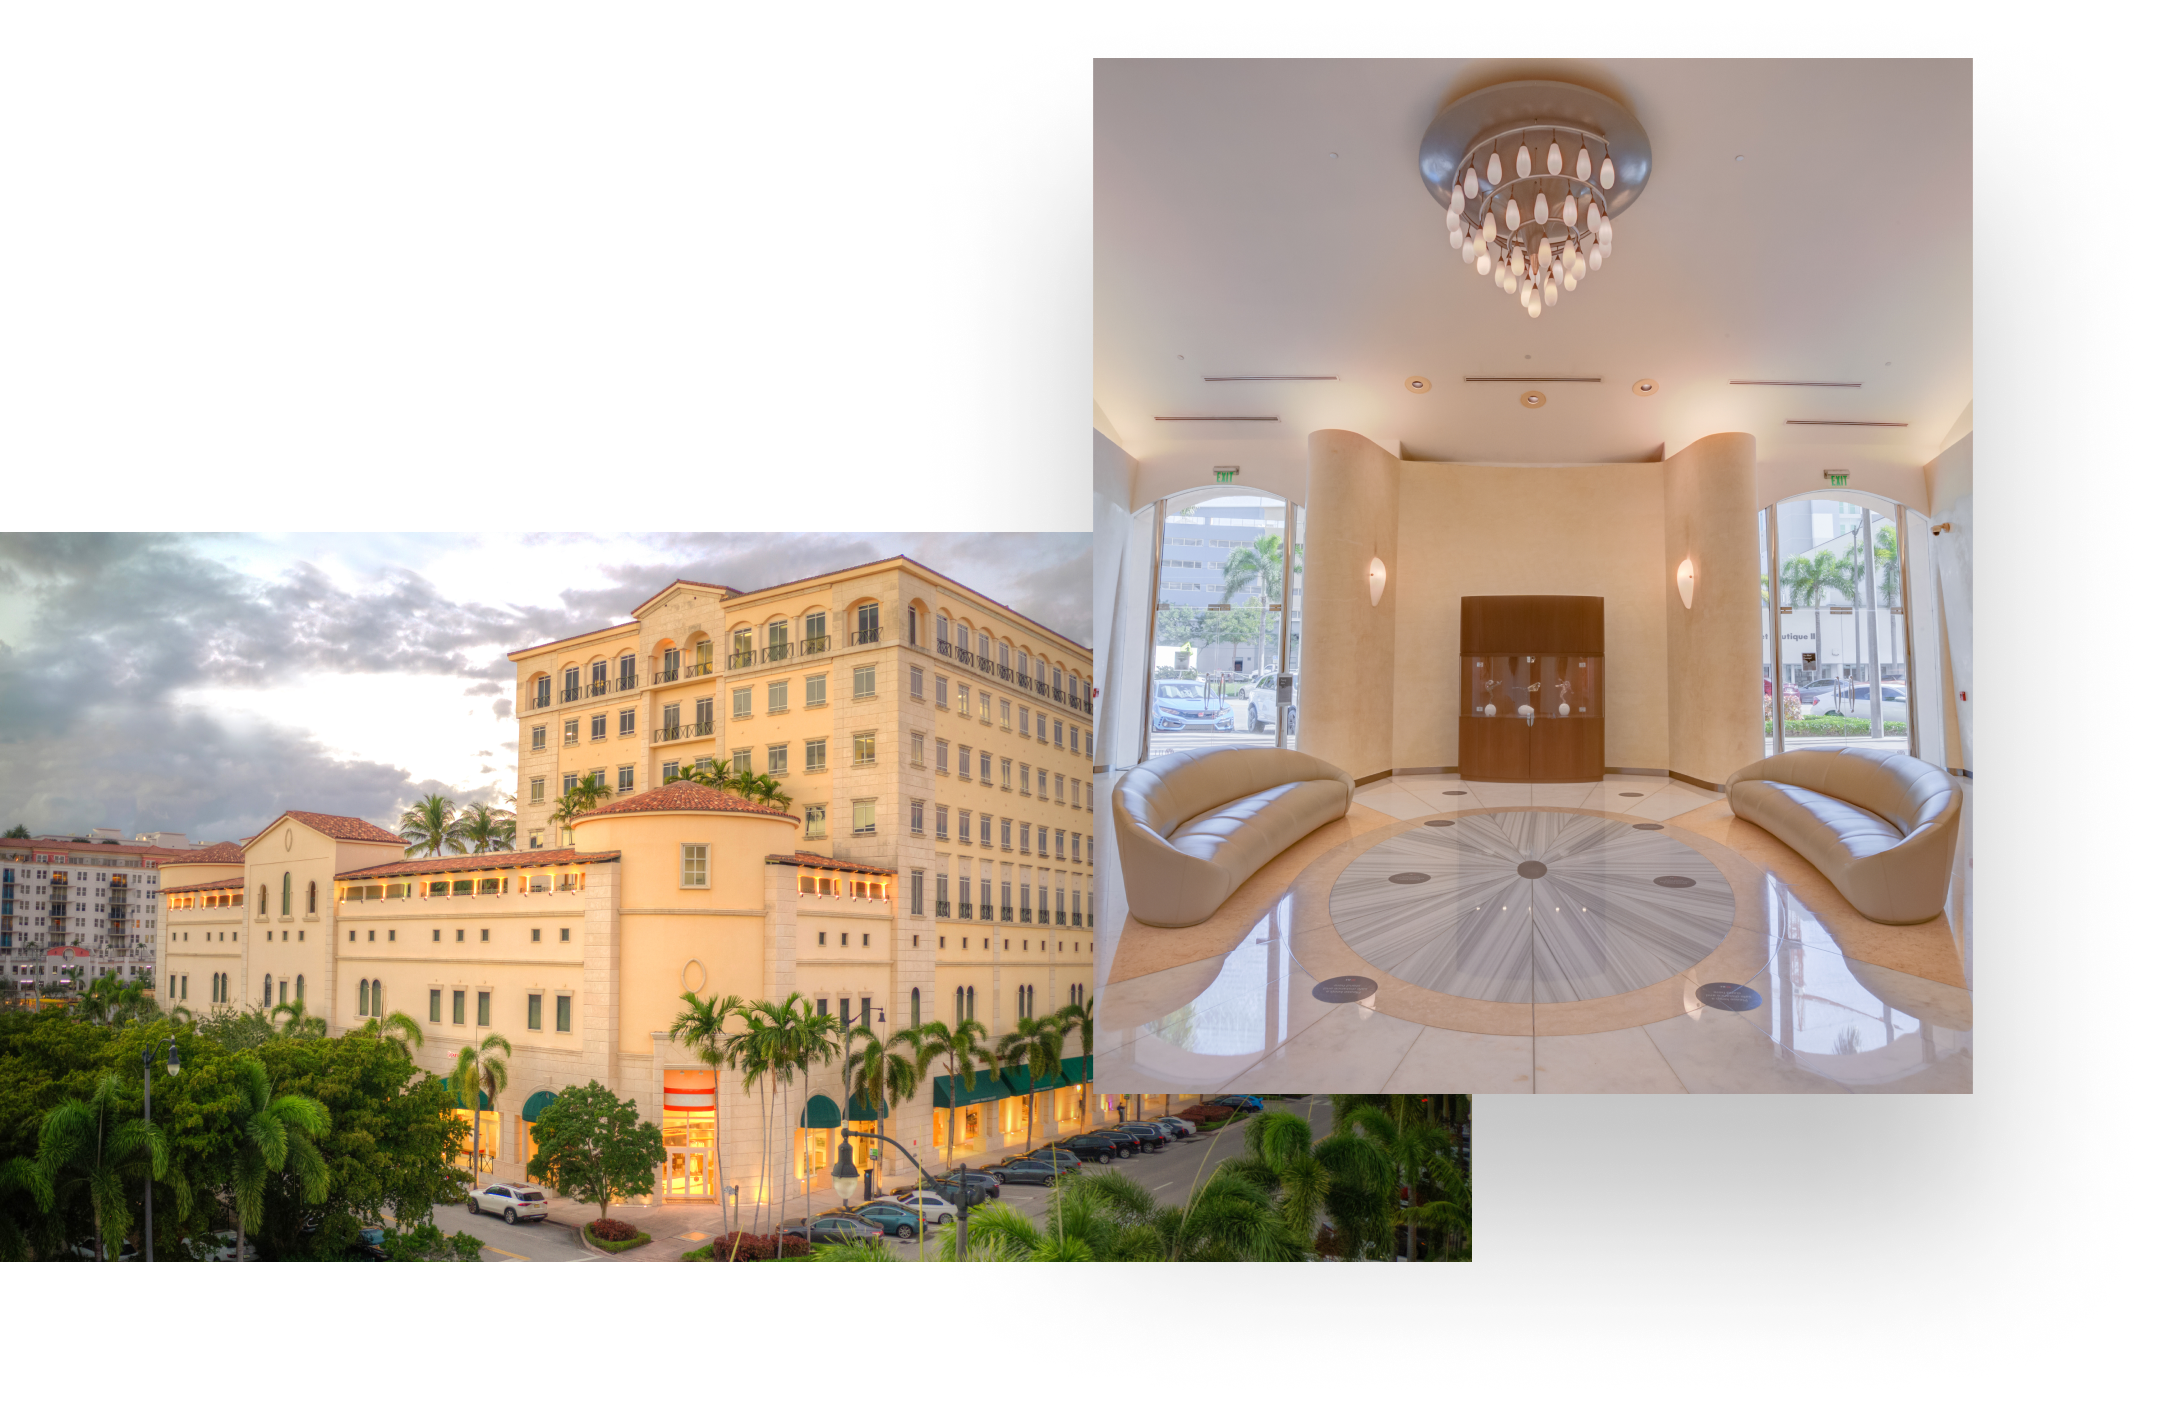 Image collage of 4000 Ponce exterior Spanish Mediterranean architecture and the interior office lobby couches.